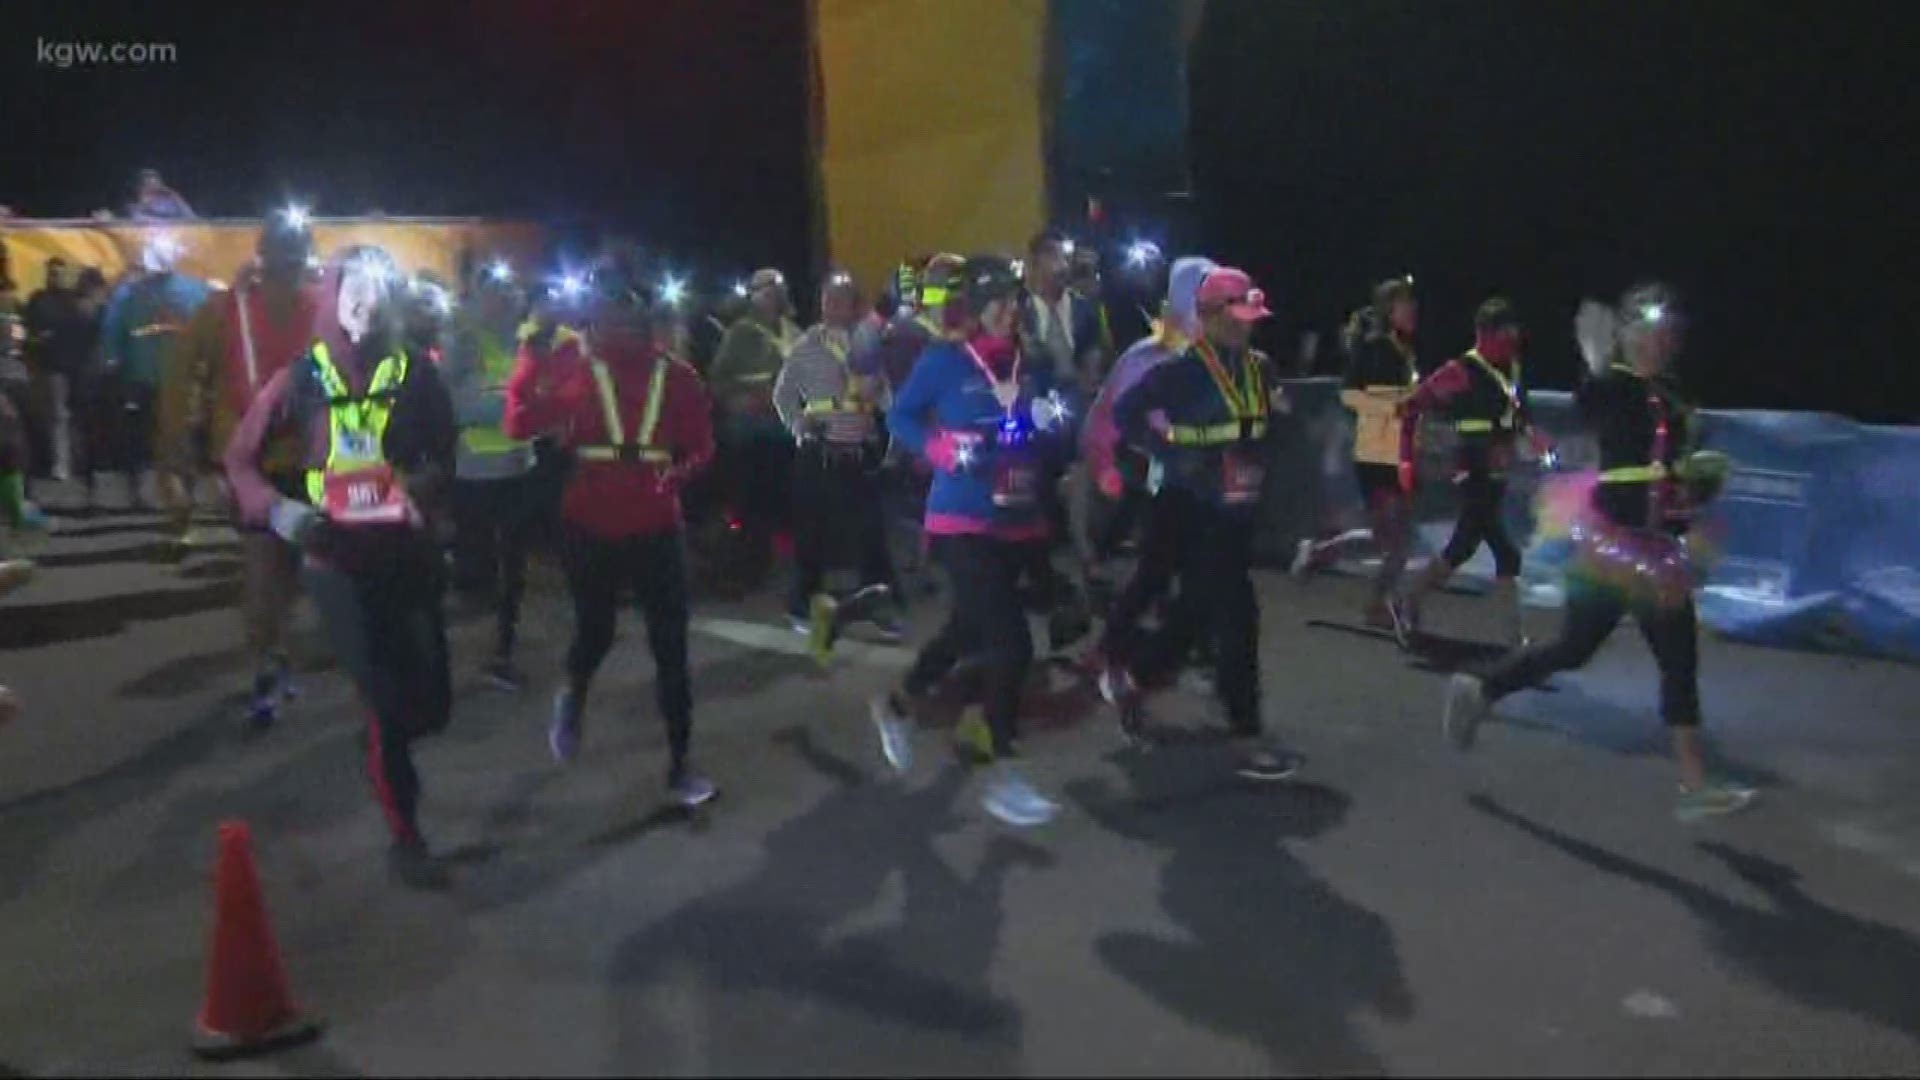 20,000 walkers and runners are just a few days out from the adventure of Hood to Coast. It’s the 38th year for the famed relay race, so we decided to take a deeper look at the company that runs the race, and where it’s going. KGW’s Pat Dooris is live with our report.